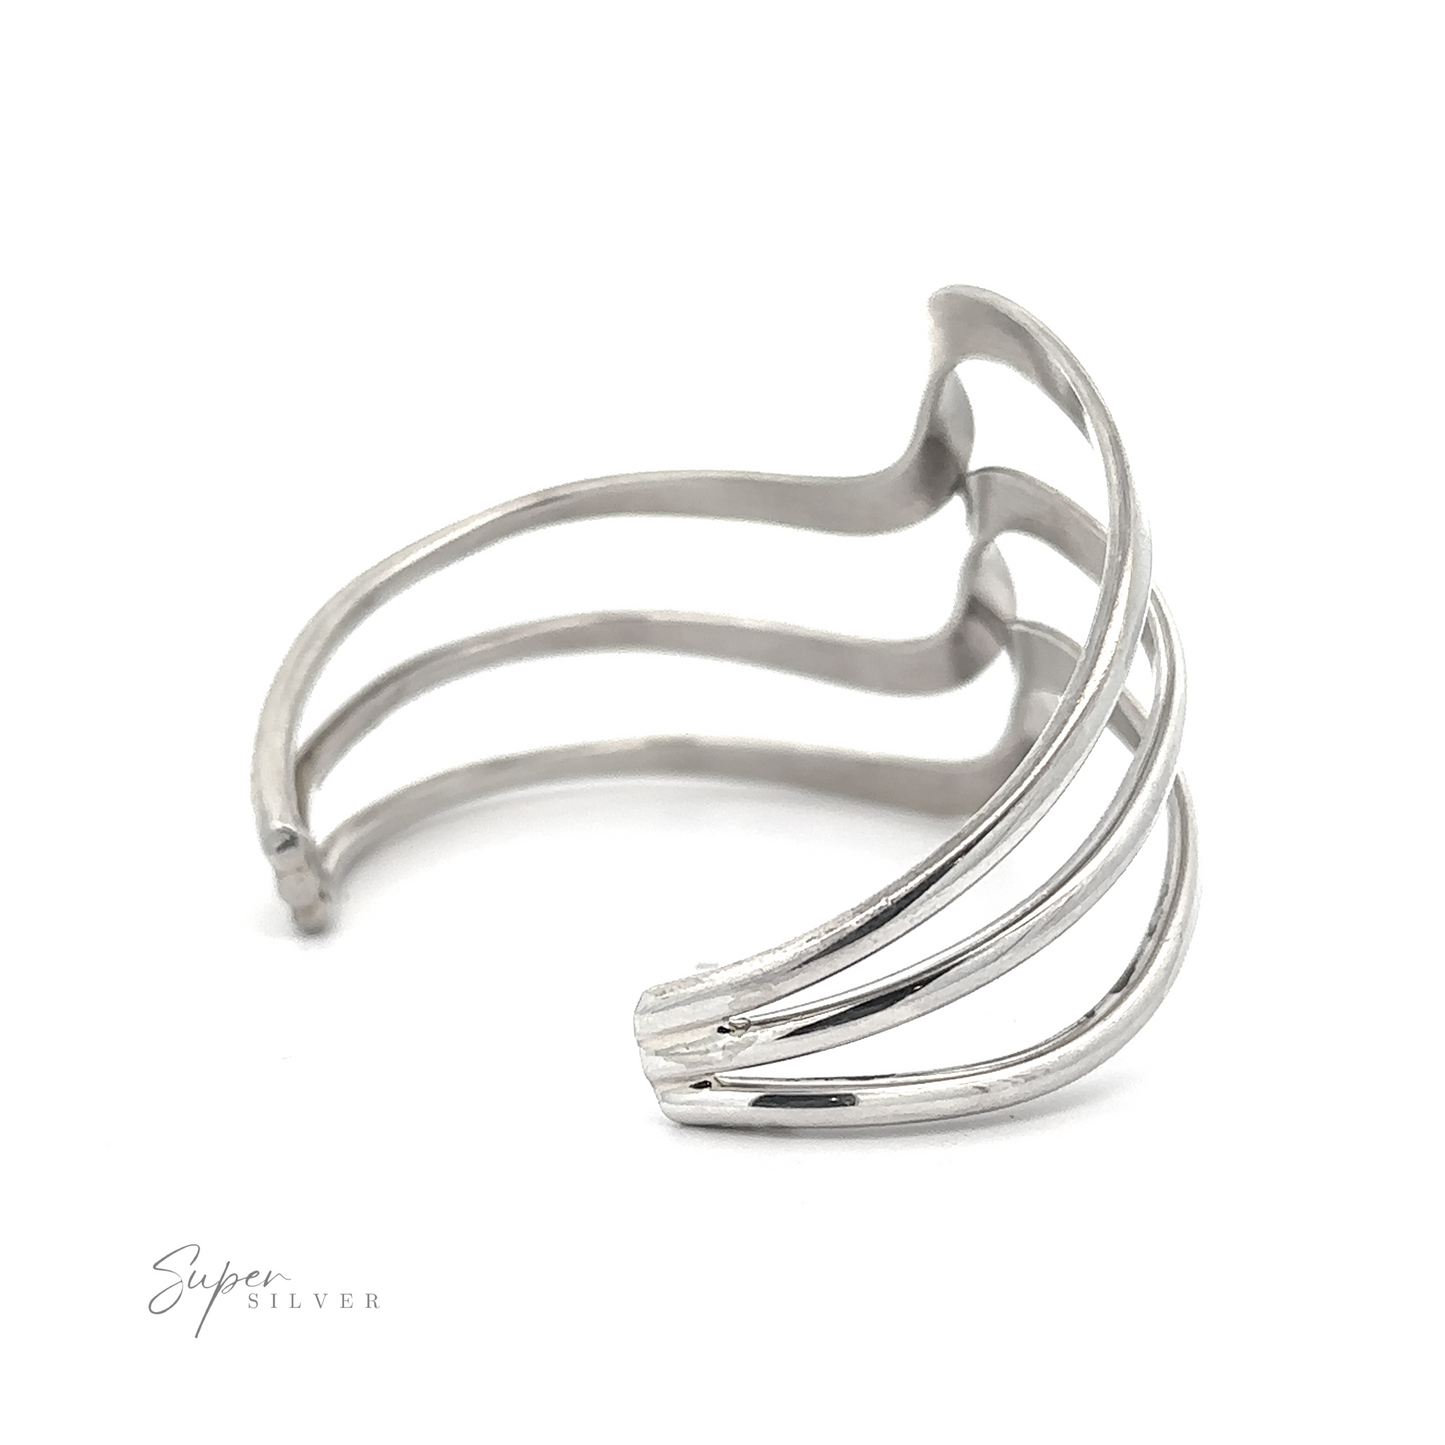 
                  
                    A Native American Handmade Silver Triple Wave Cuff with three parallel bands and a subtle wave design, fitting a 6-7 inch wrist. The brand name "Super Silver" is visible in the lower left corner.
                  
                